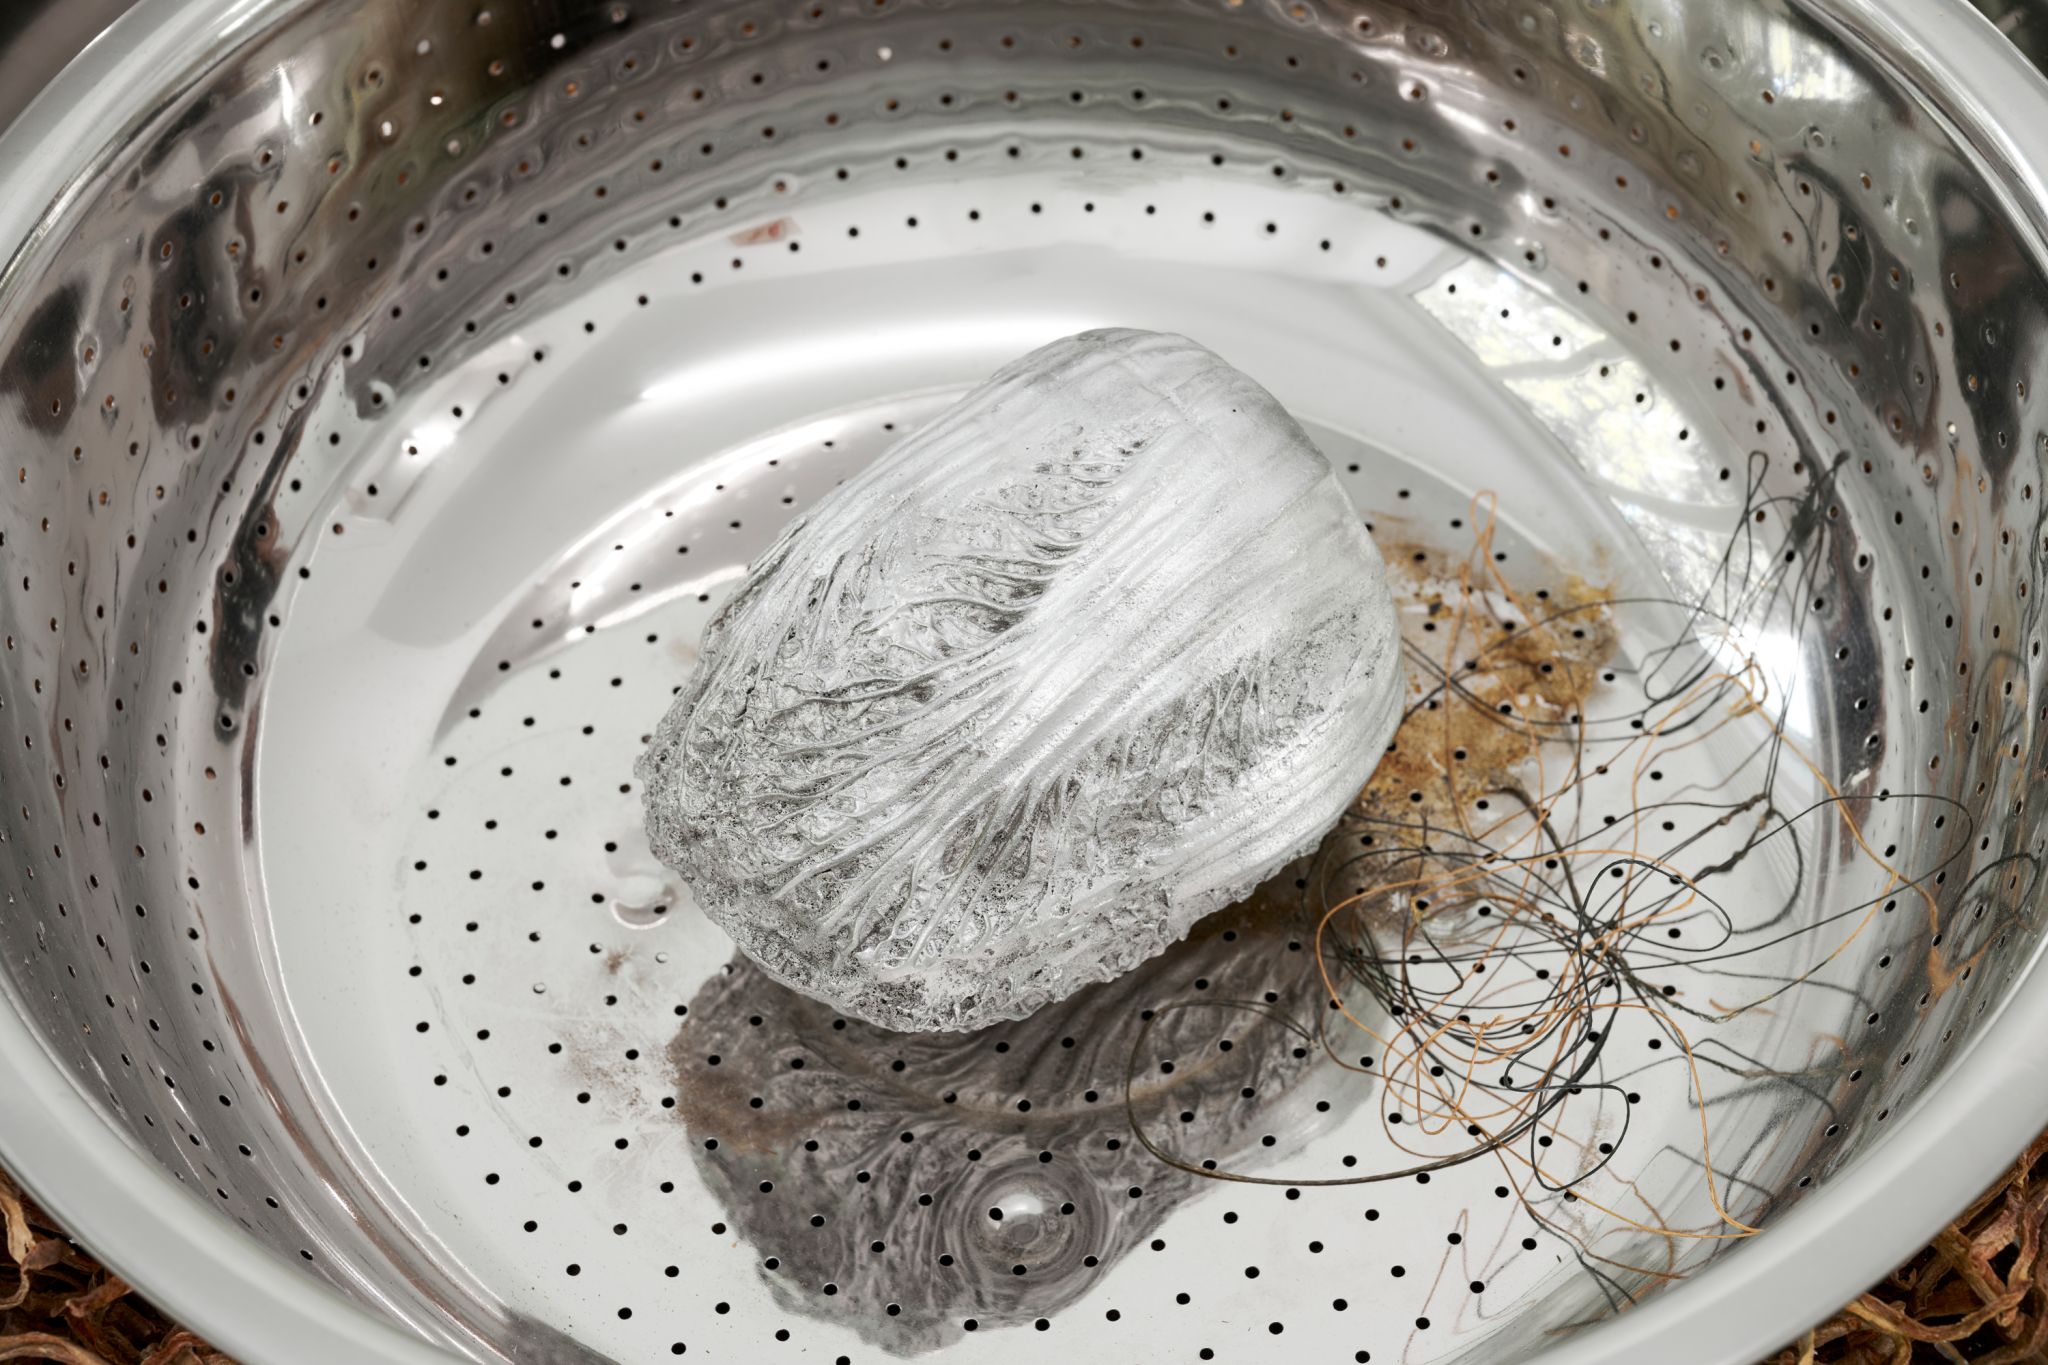 Lotus L. Kang, Mother (Spore, Jan-Mar 2023), 2023, Stainless steel mixing bowls, pigmented silicone, rubber, cast aluminum anchovies, cast aluminum lotus root, cast aluminum kelp knots, cast aluminum dried pear, cast aluminum cabbage, dried carrot, fishing line, hat, Dimensions variable